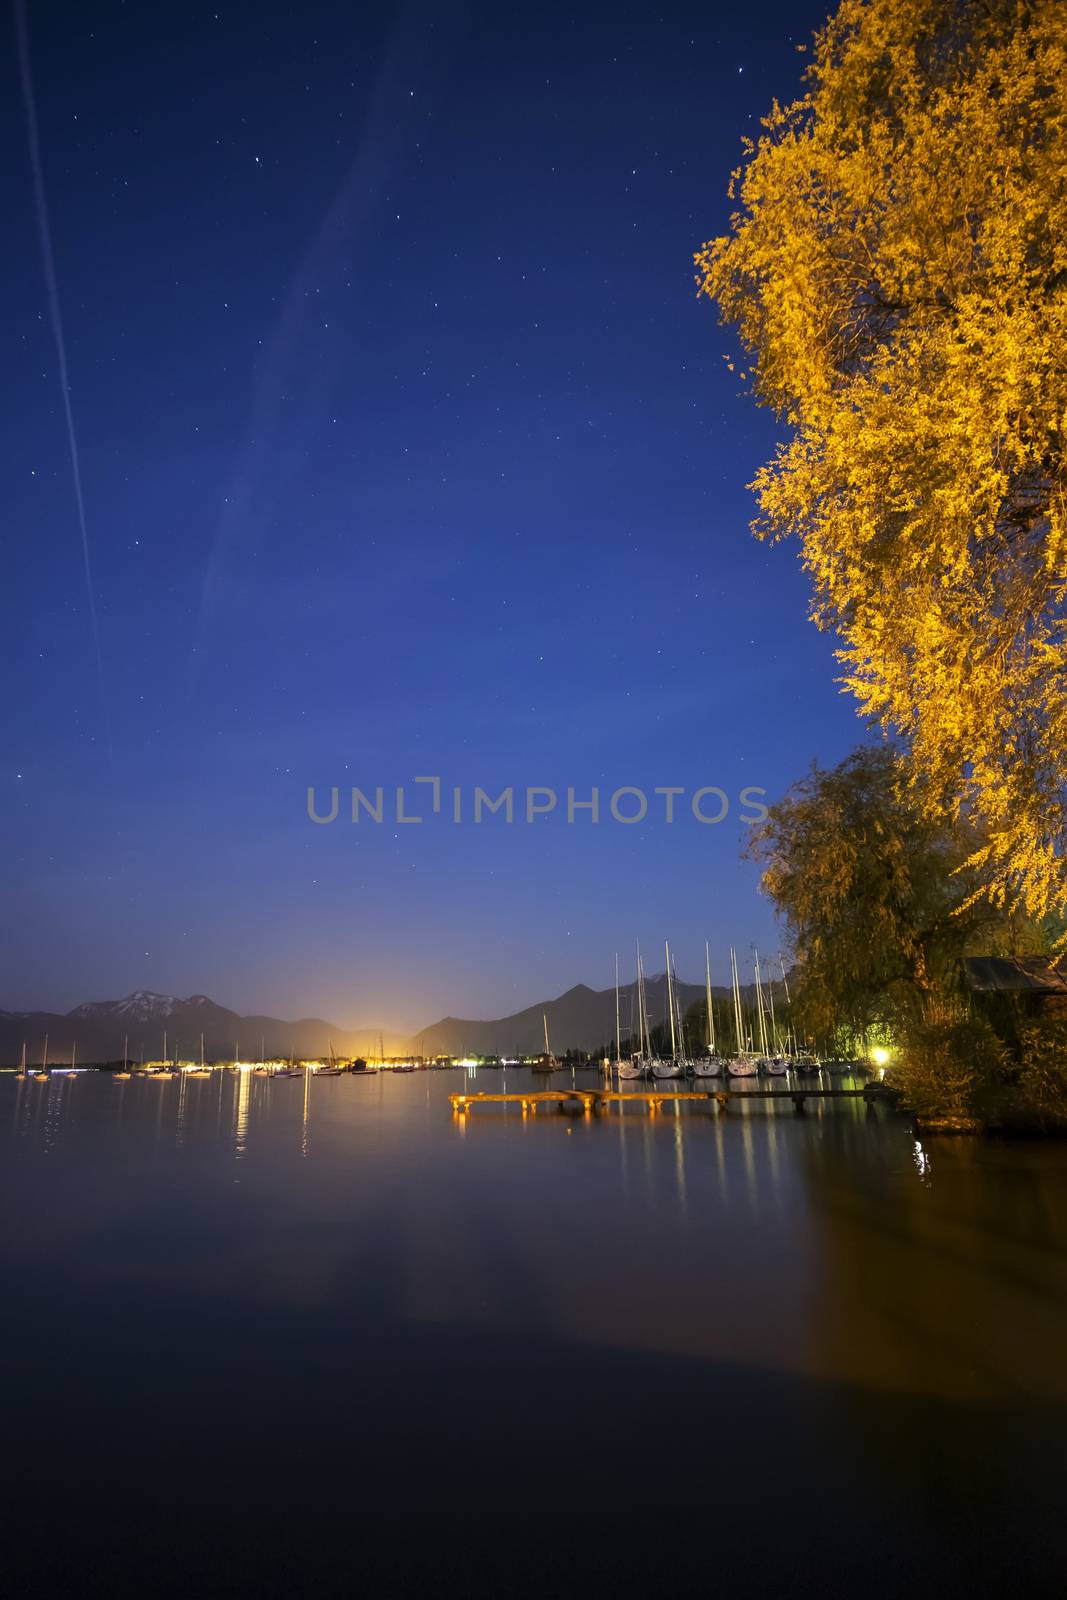 Chiemsee at night by w20er